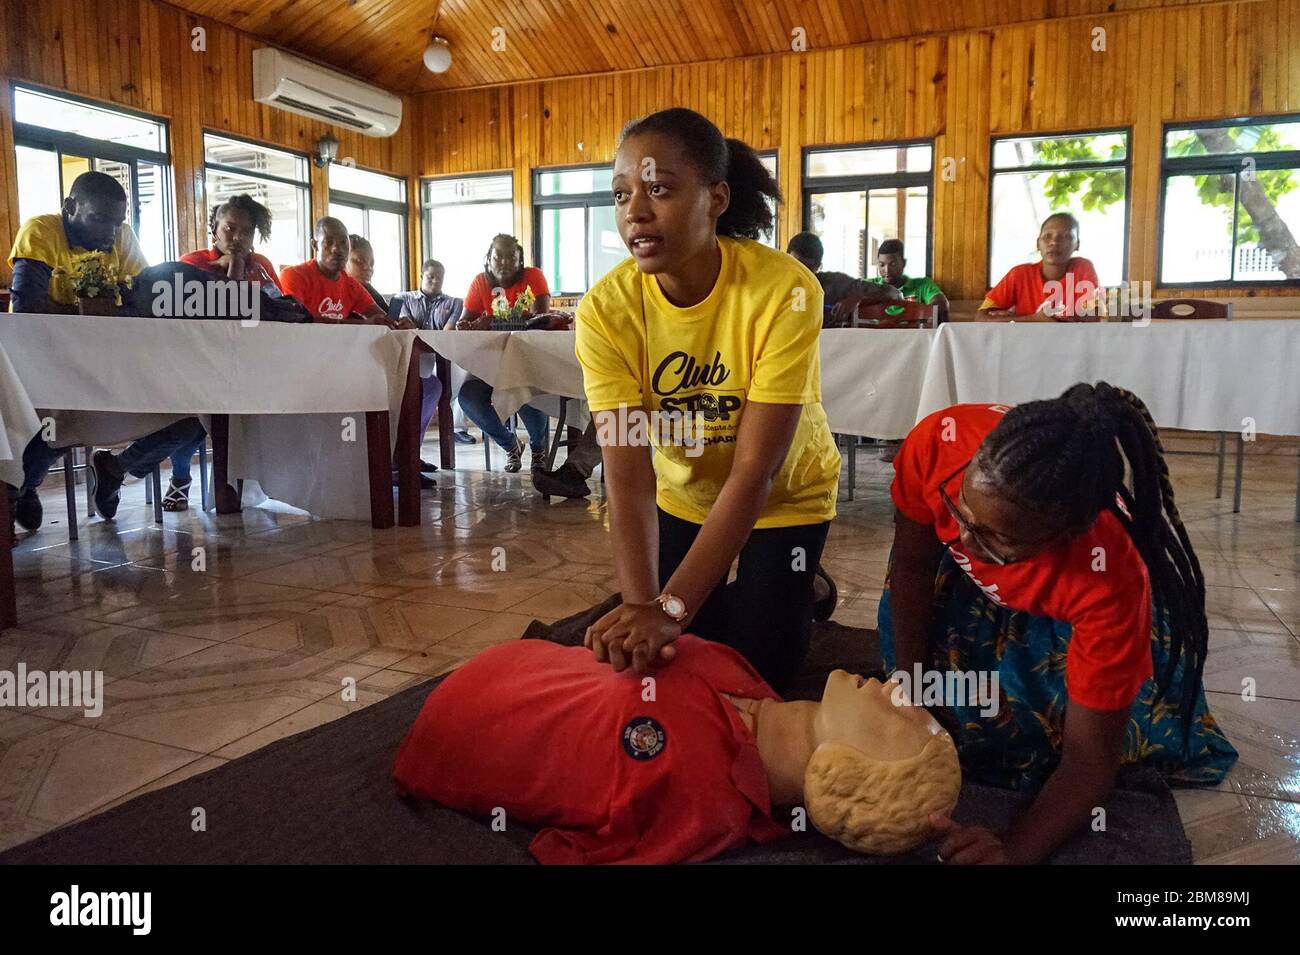 Marie Esther Jean, 21, says she chose to take part in the first-aid training because she’s tired of seeing young people film the aftermath of accidents. She wants to be able to help instead. (Anne Myriam Bolivar, GPJ Haiti) Stock Photo